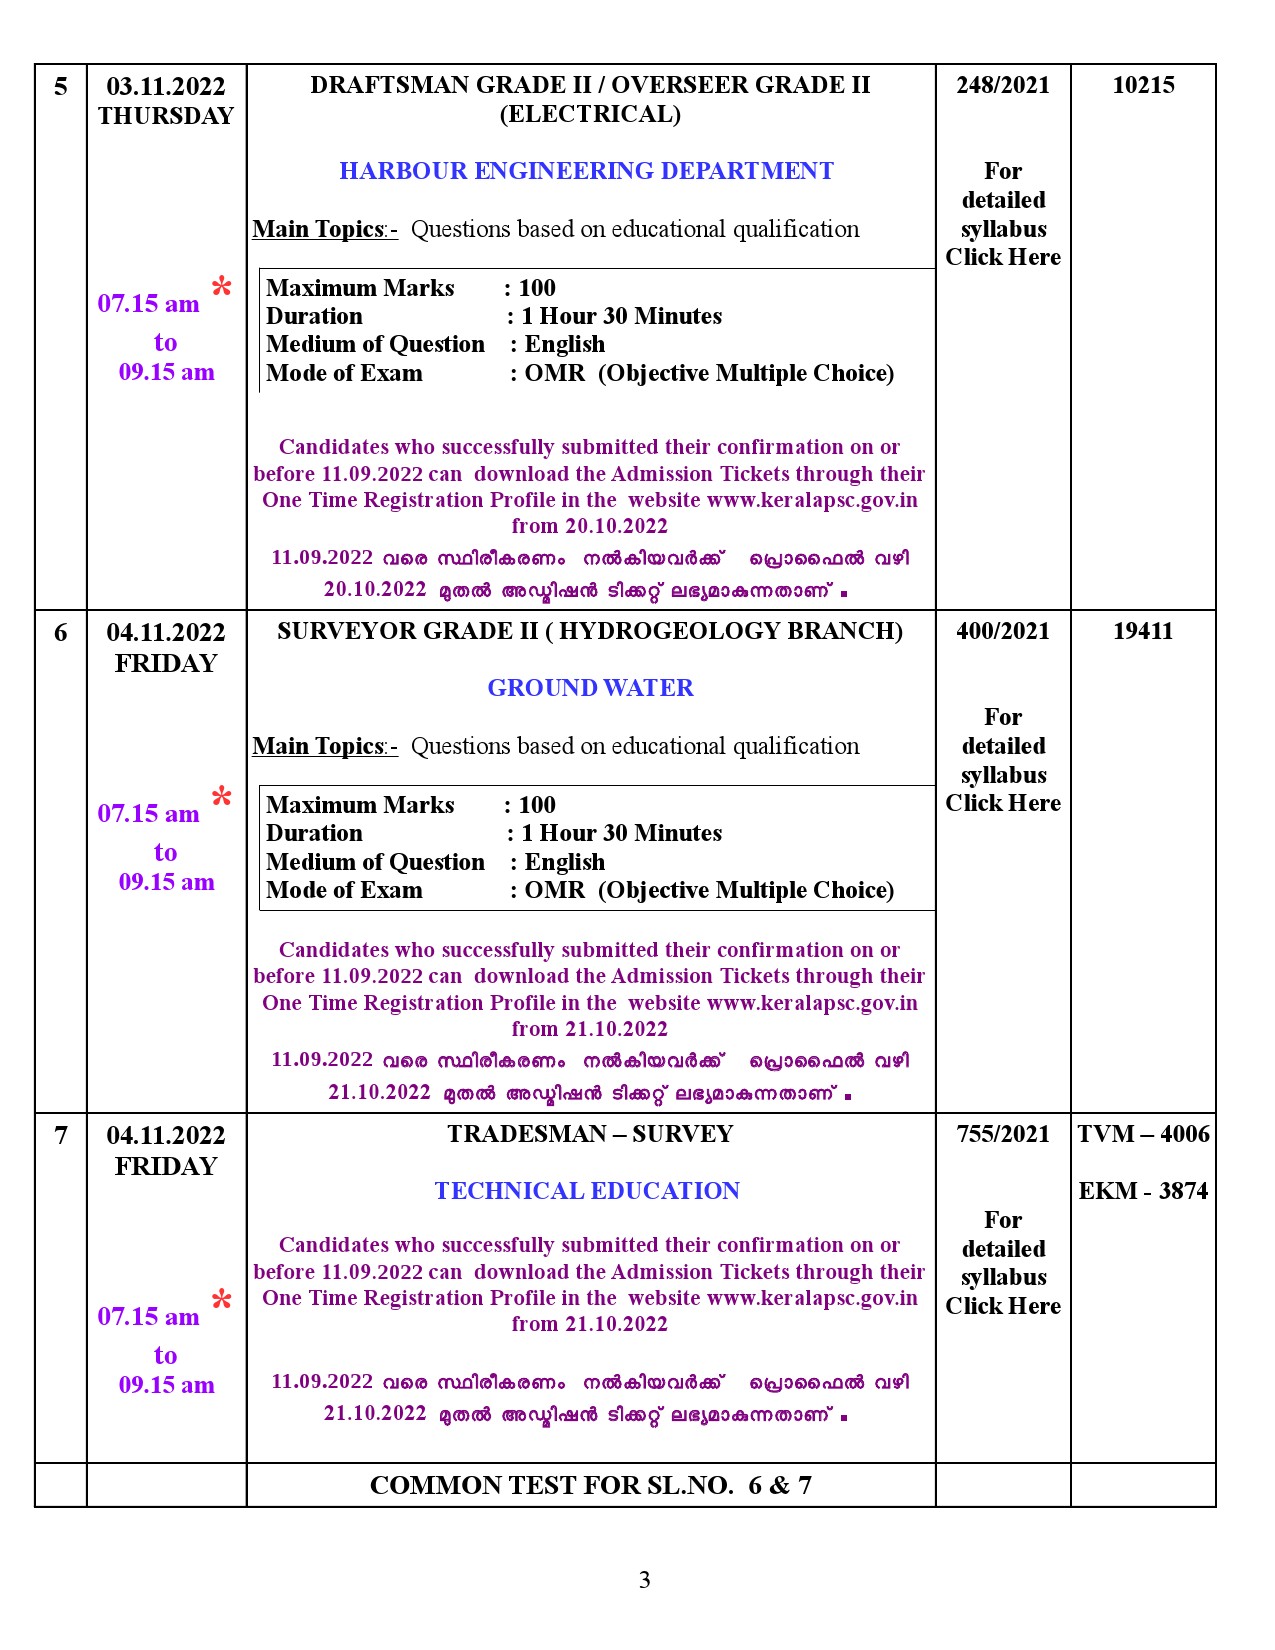 EXAMINATION PROGRAMME FOR THE MONTH OF NOVEMBER 2022 AFTER CONFIRMATION - Notification Image 3